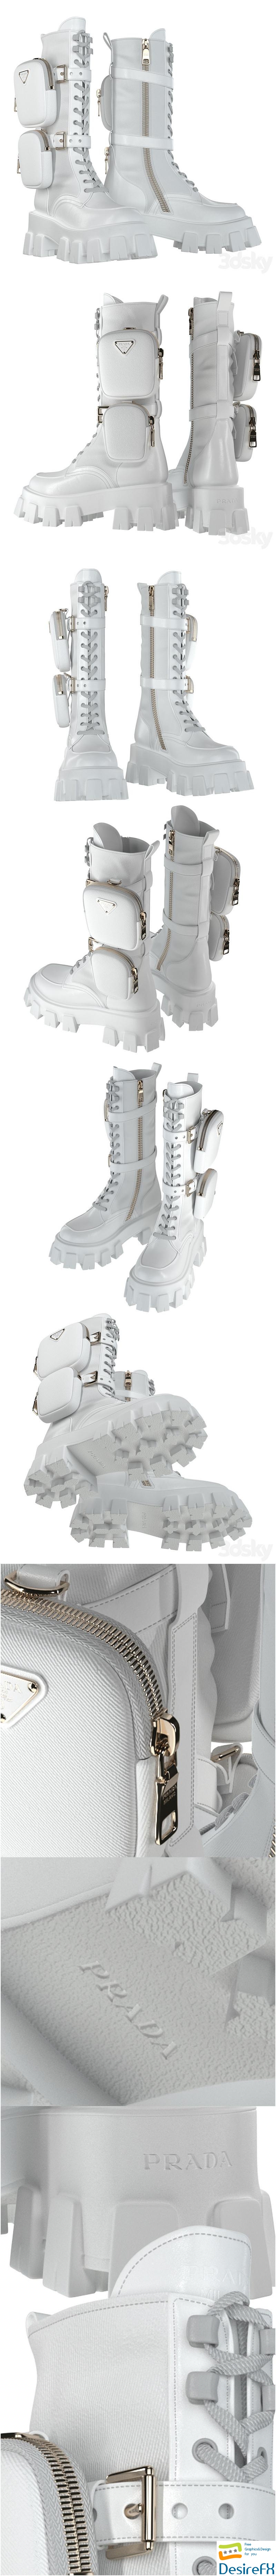 PRADA Brushed rois leather and nylon Monolith boots white 3D Model